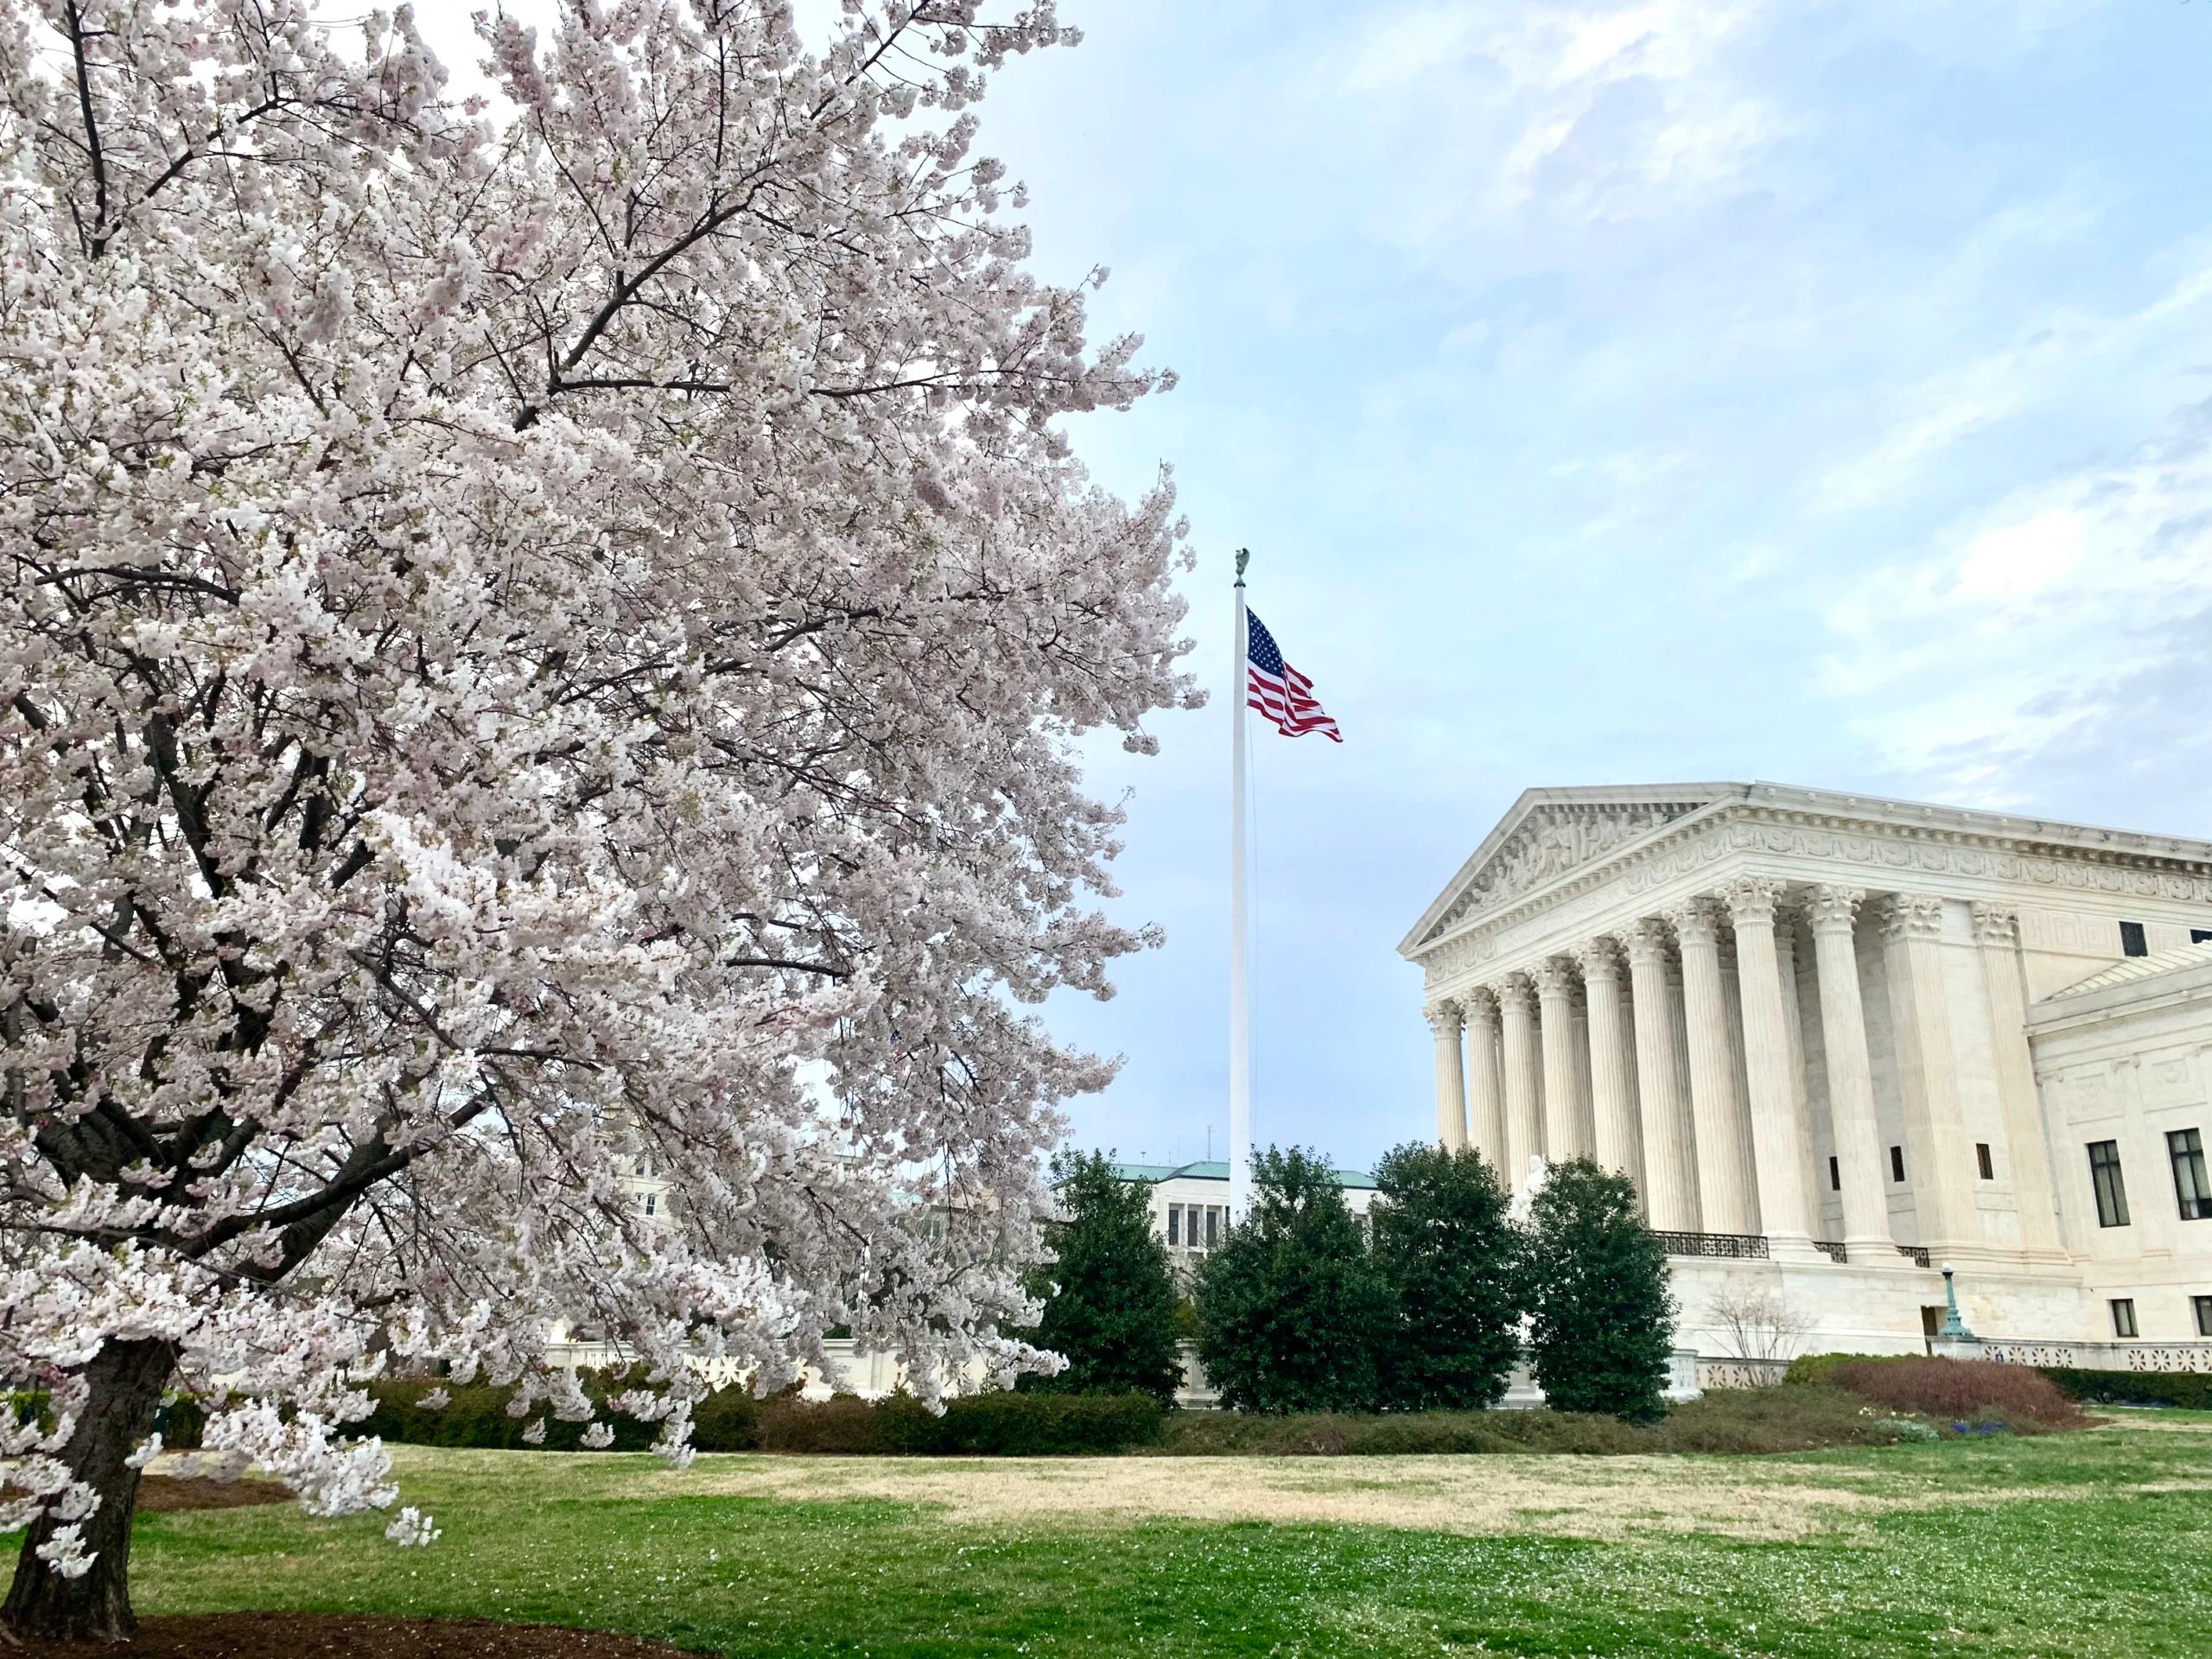 A side view of SCOTUS, cherry blossoms in full bloom next to it can be seen